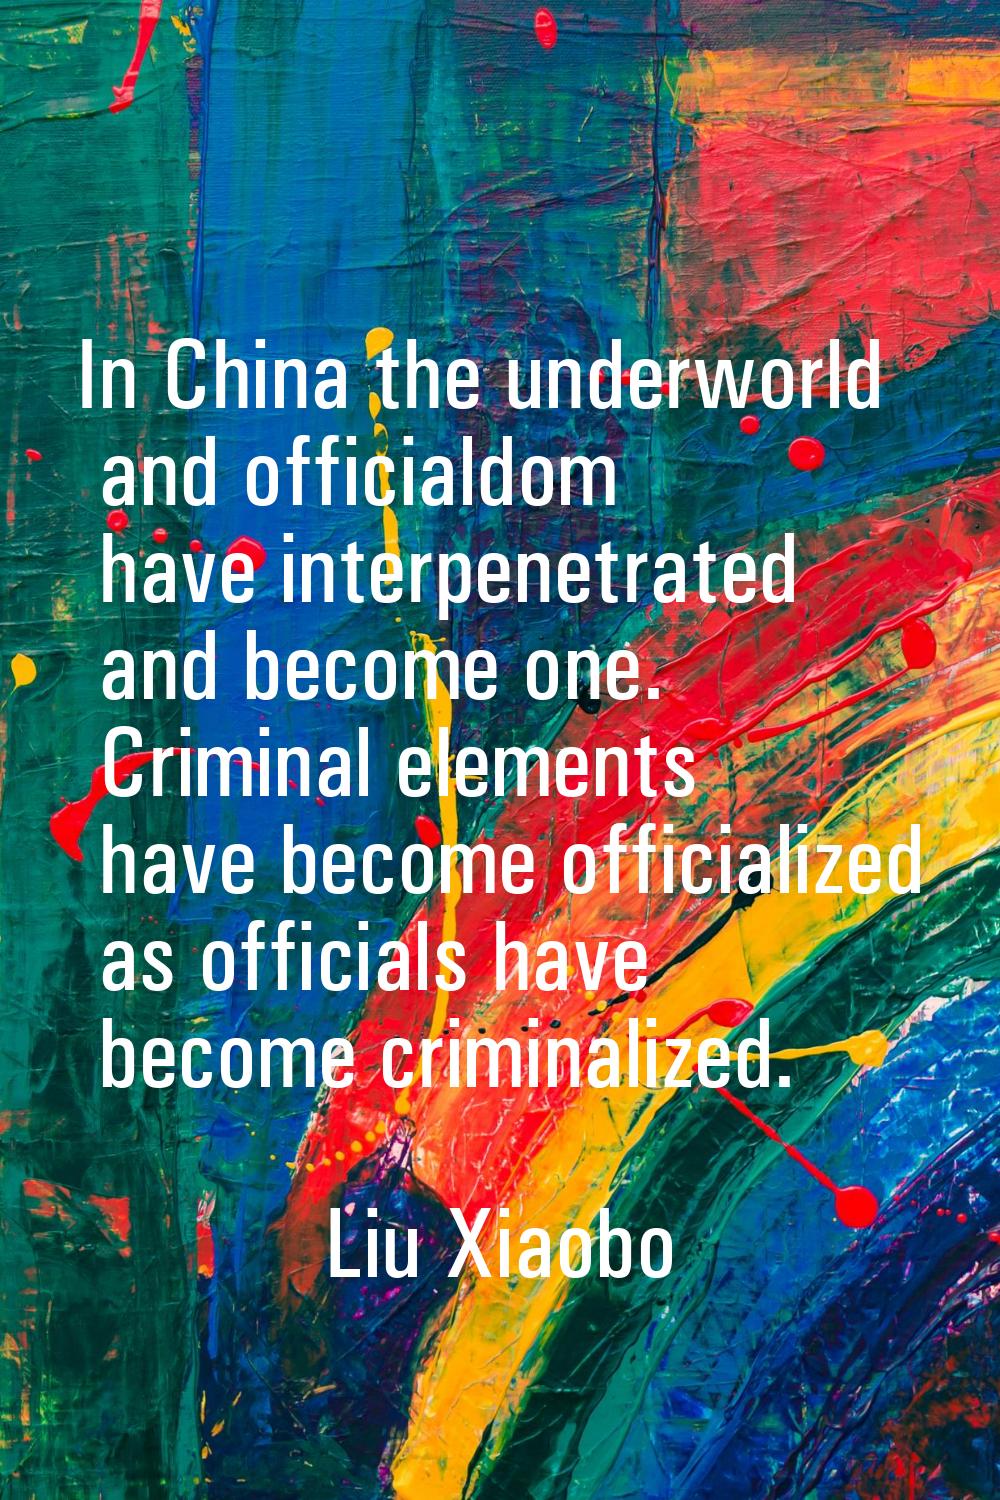 In China the underworld and officialdom have interpenetrated and become one. Criminal elements have